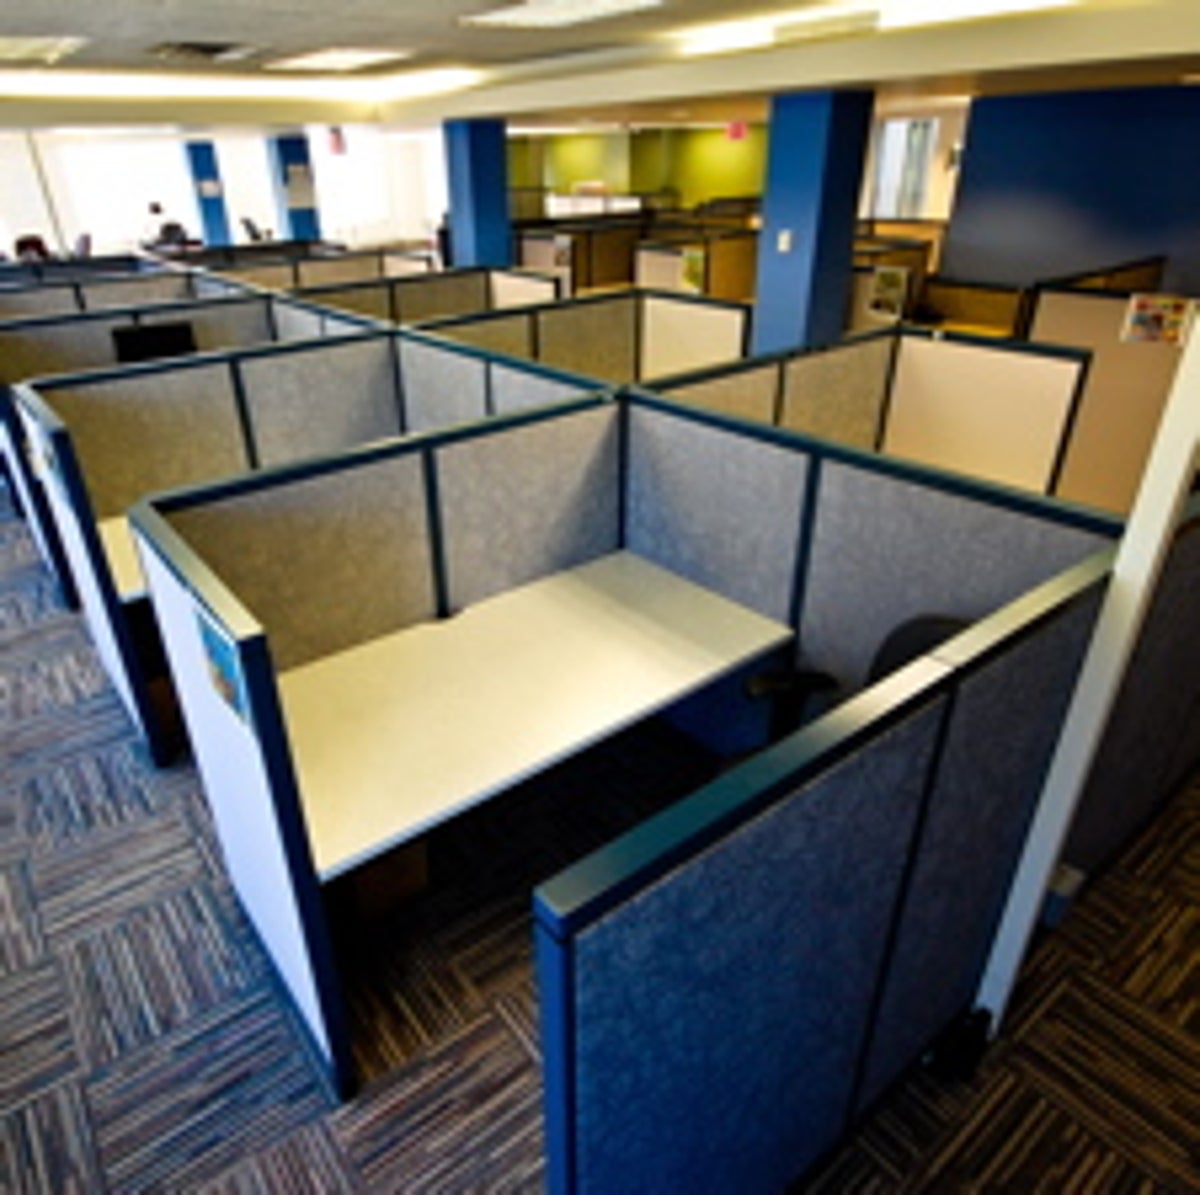 Achieving Thermal Comfort with Office Design - Facilities